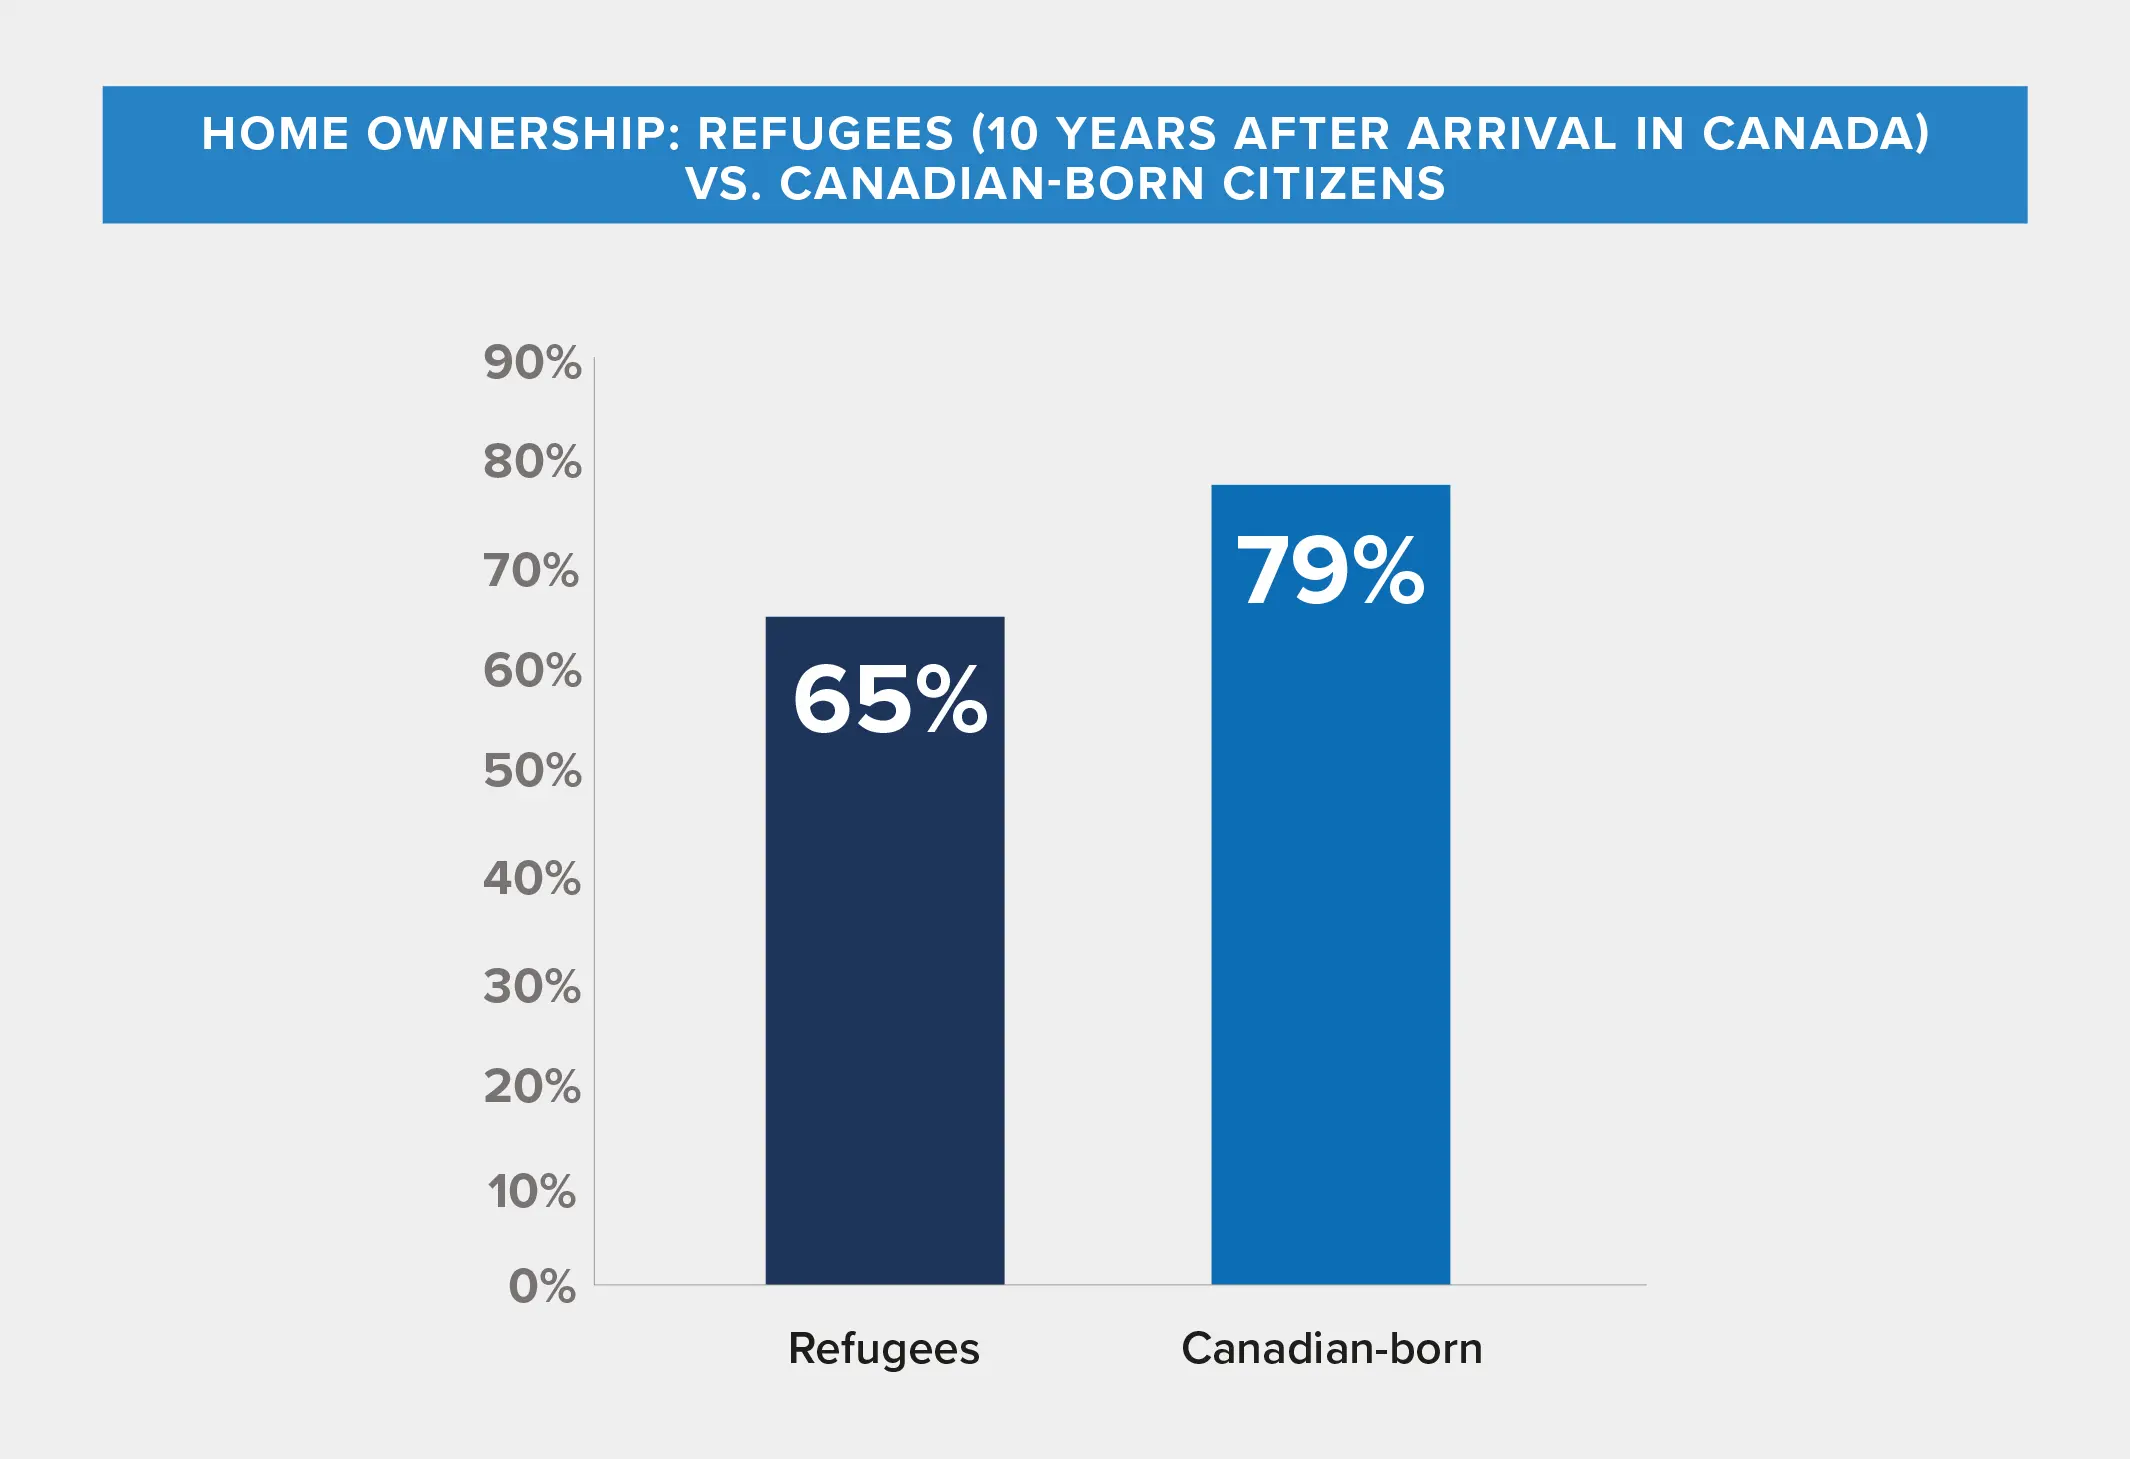 Graph showing the percentage of refugees who own their home after 10 years in Canada versus Canadian-born citizens.